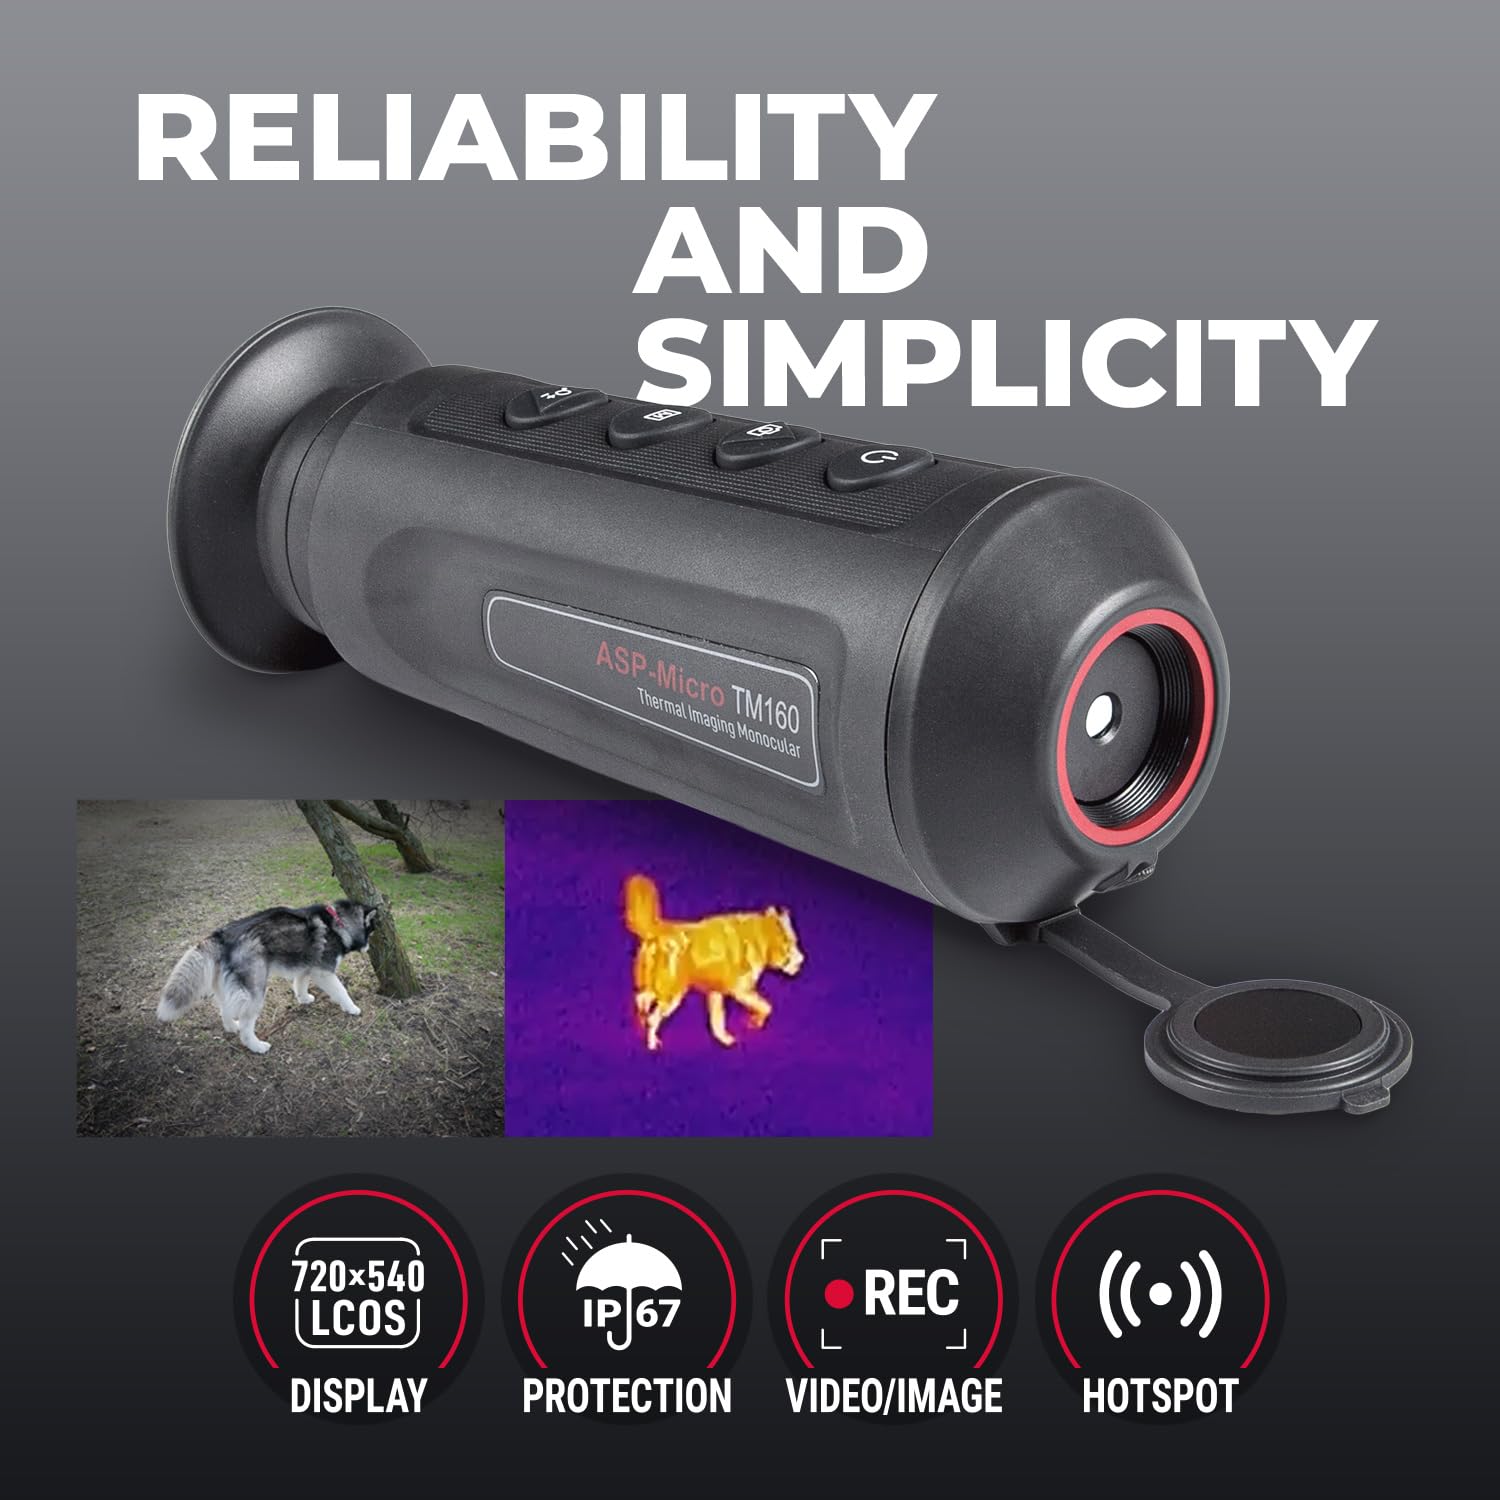 AGM Global Vision Asp-Micro TM160 Short Range Thermal Imaging Monocular with Heat Vision for Hunting, High-Sensitivity Infrared monocular with Distance Measurement and Wi-Fi Hotspot 6.3 × 2.4 × 2.2